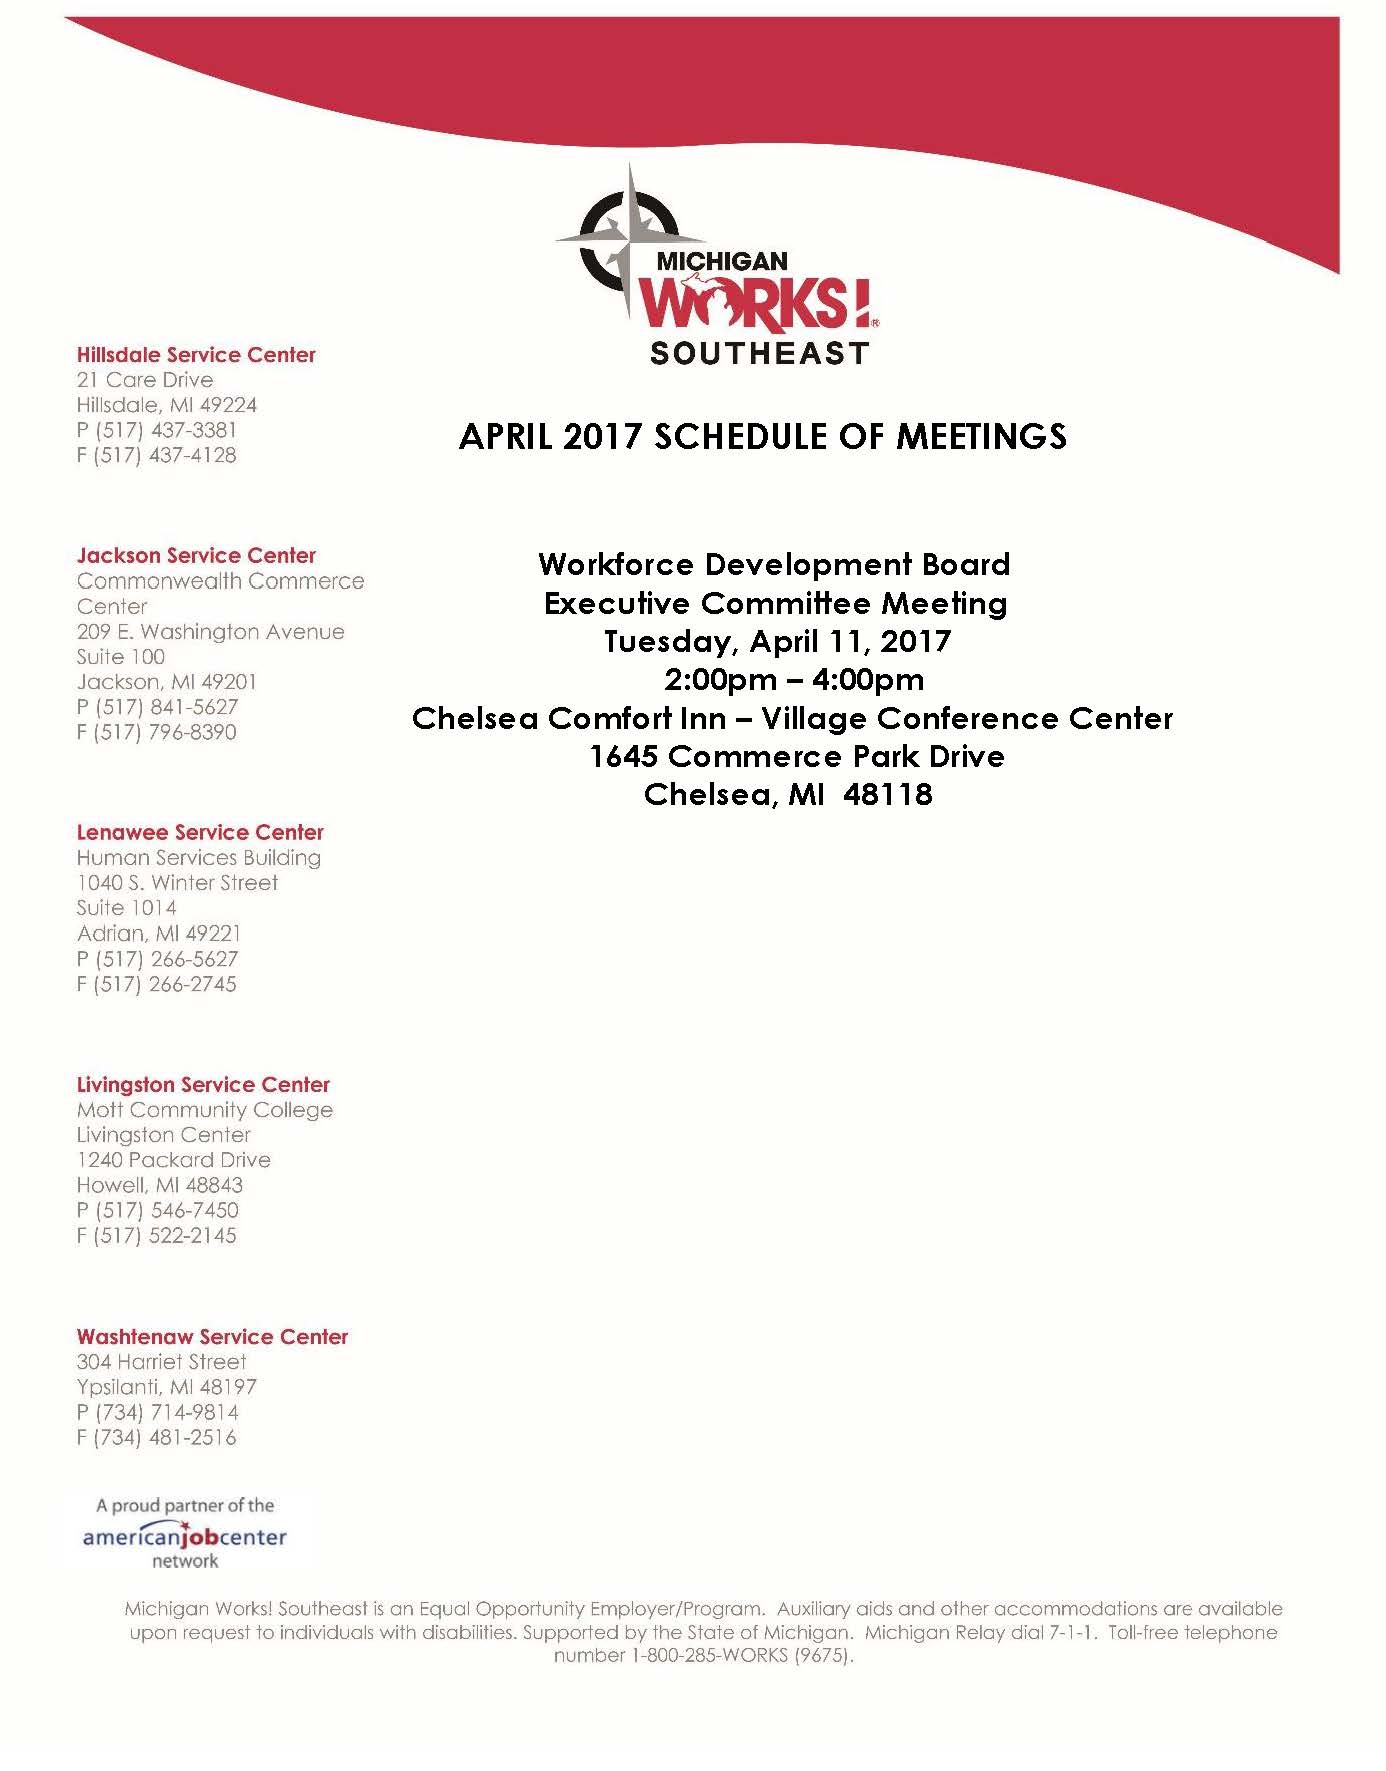 Public Meeting Notice for MWSE April 2017